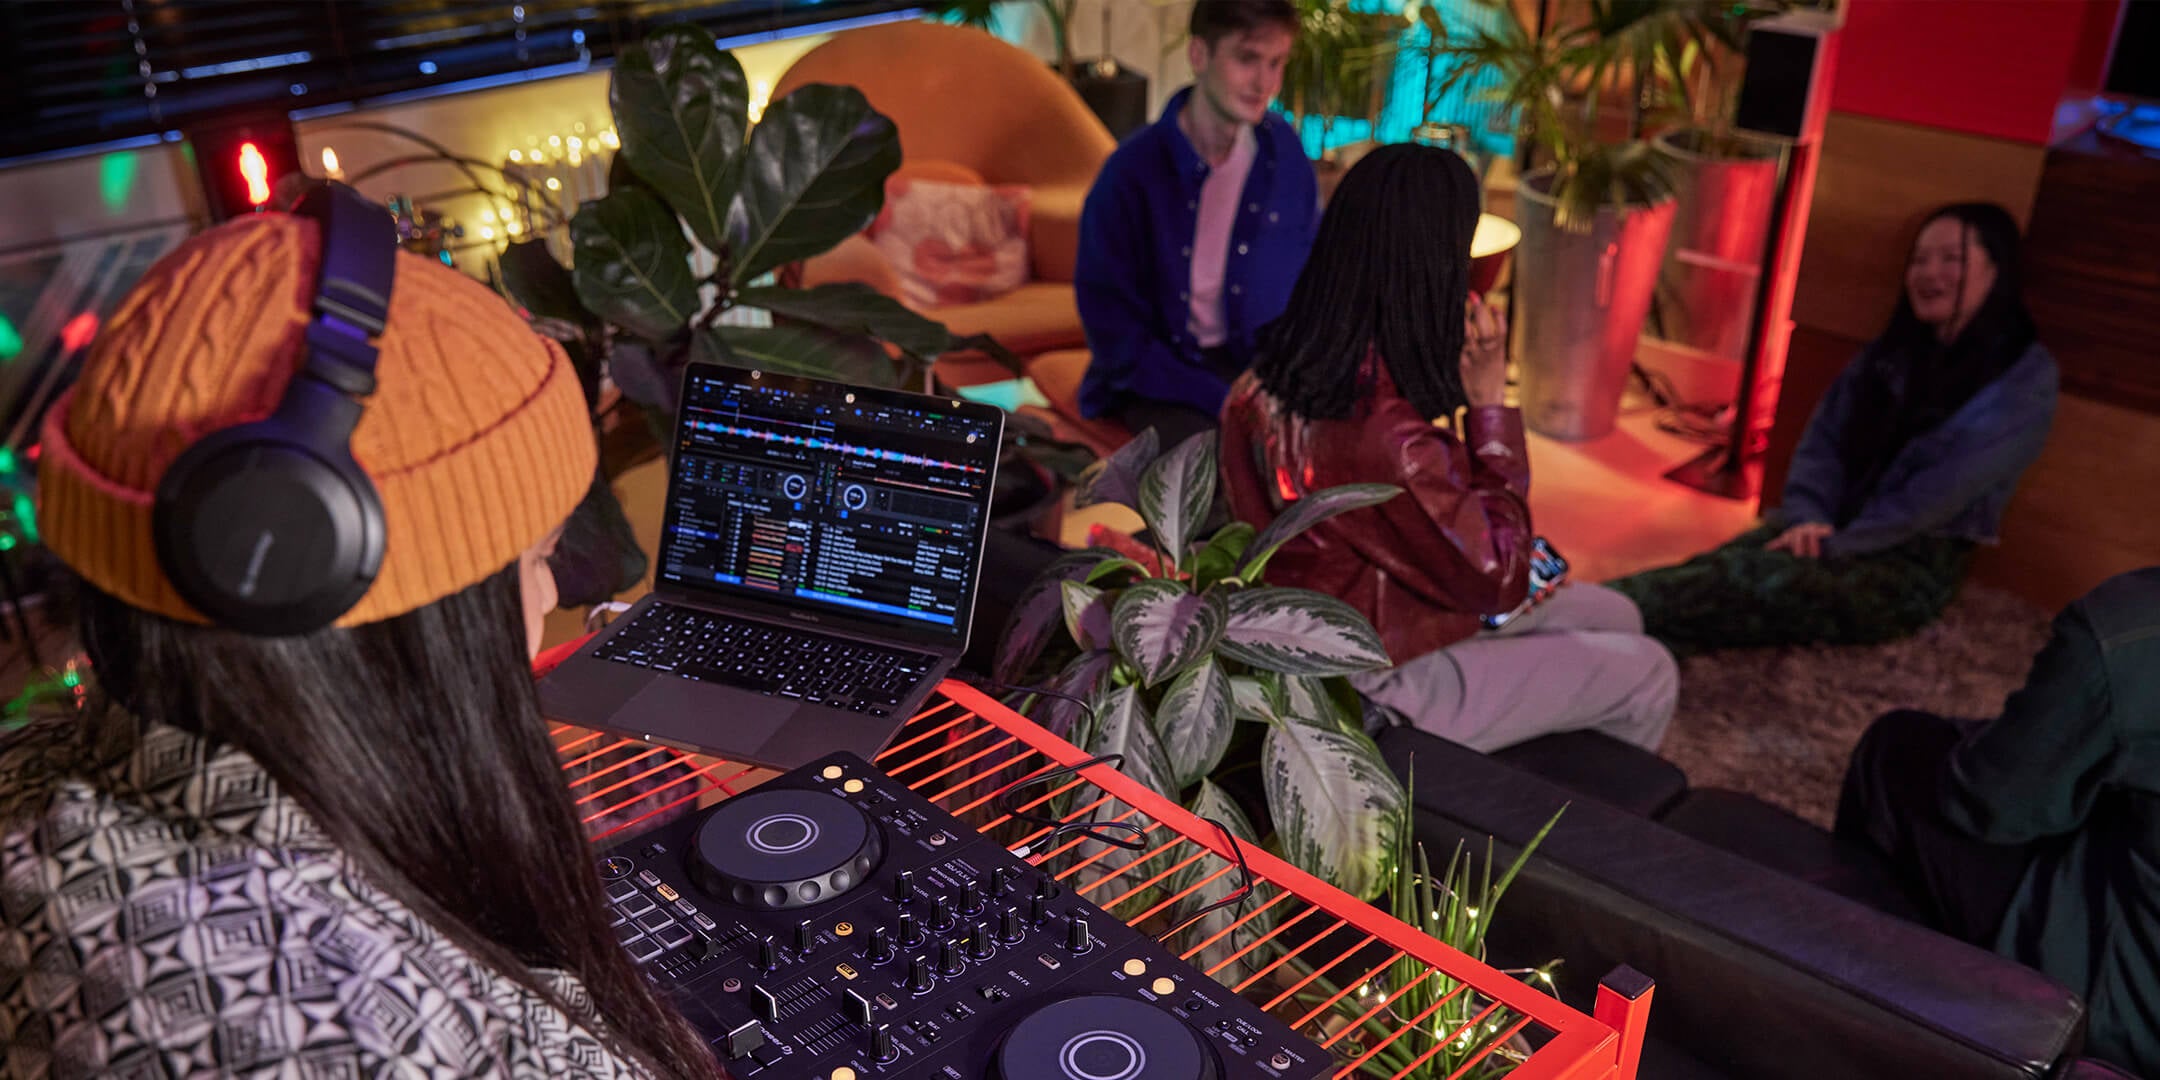 A DJ playing a set to friends in relaxed surroundings